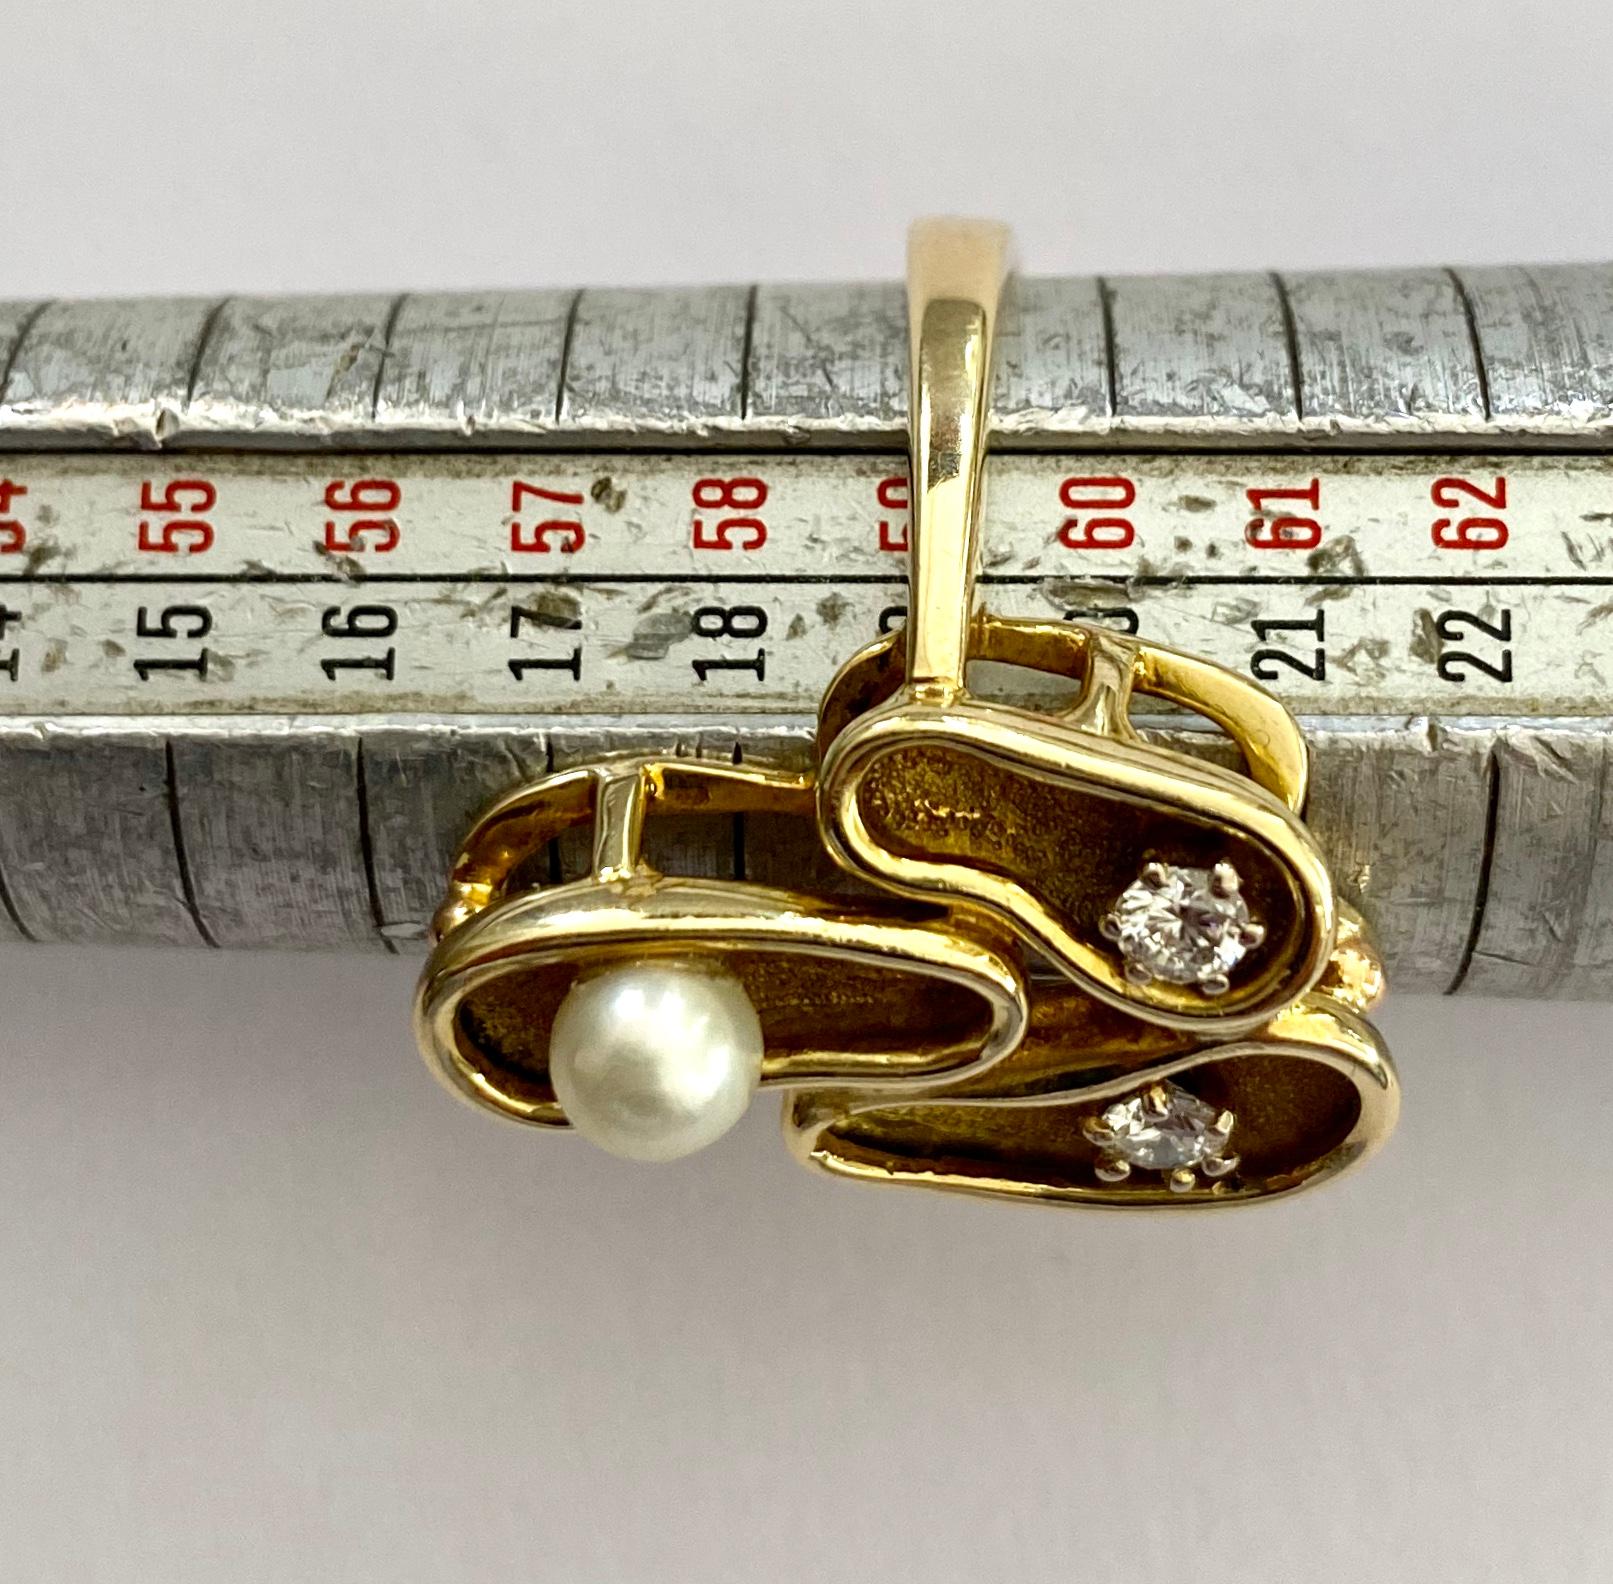 Women's One '1' 14 Karat Yellow Gold Ring, 2 Diamonds and 1 Cultured Pearl, Germany 1960